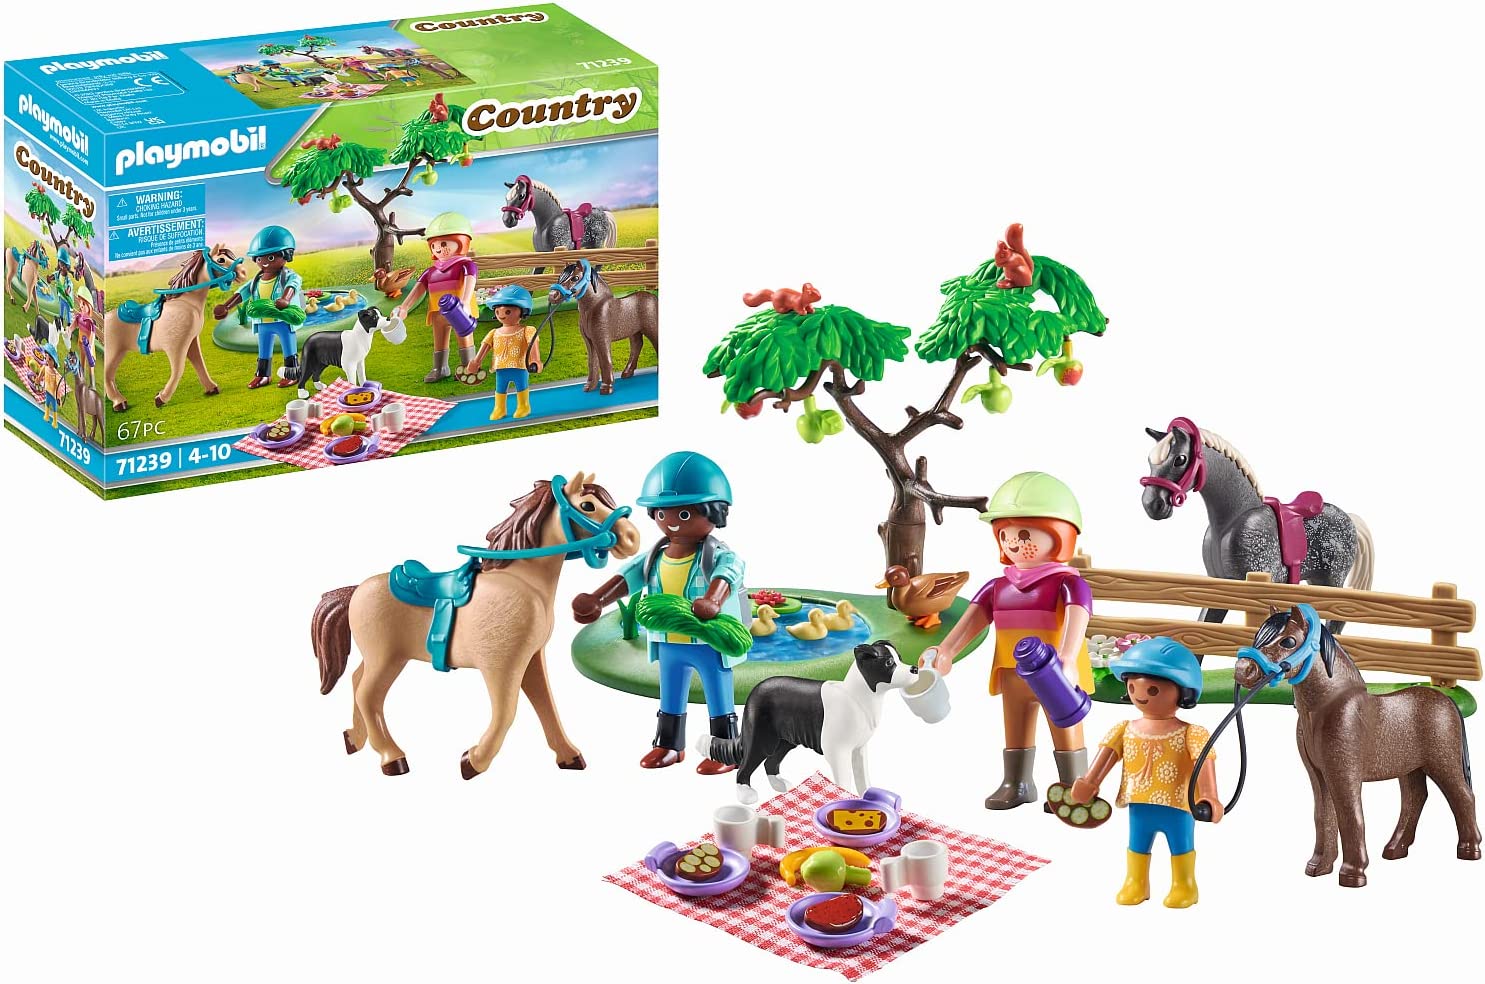 Playmobil Country 71239 Picnic Trip with Horses, Family Picnic in Green, Toy for Children from 4 Years